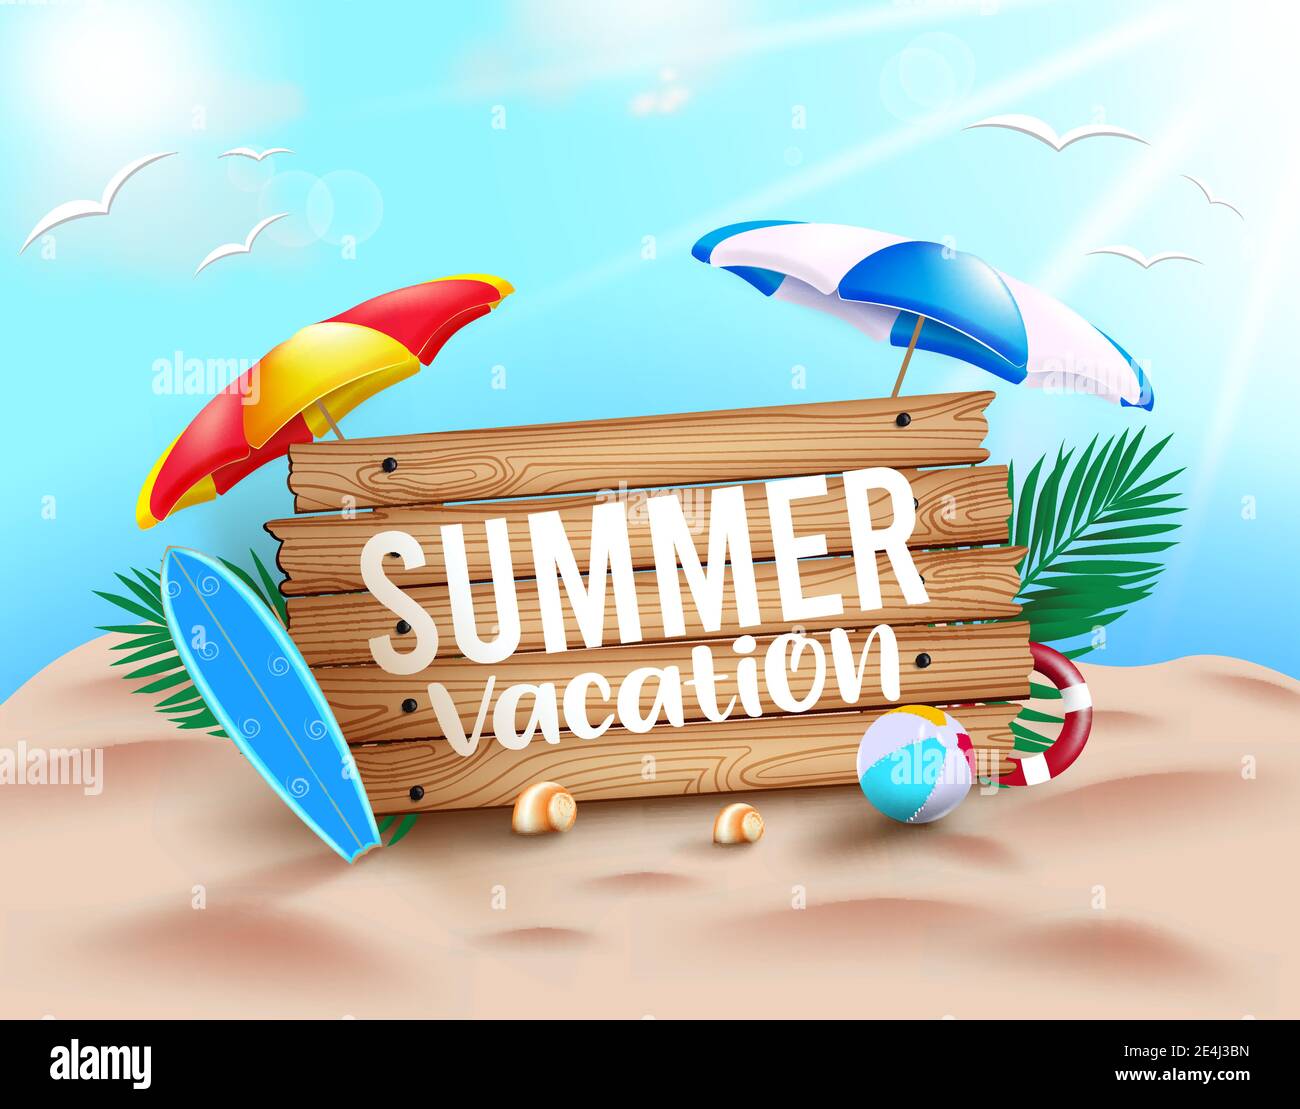 Summer vacation vector concept design. Summer vacation text in wood texture with beach elements like umbrella, surfboard and beachball for fun. Stock Vector